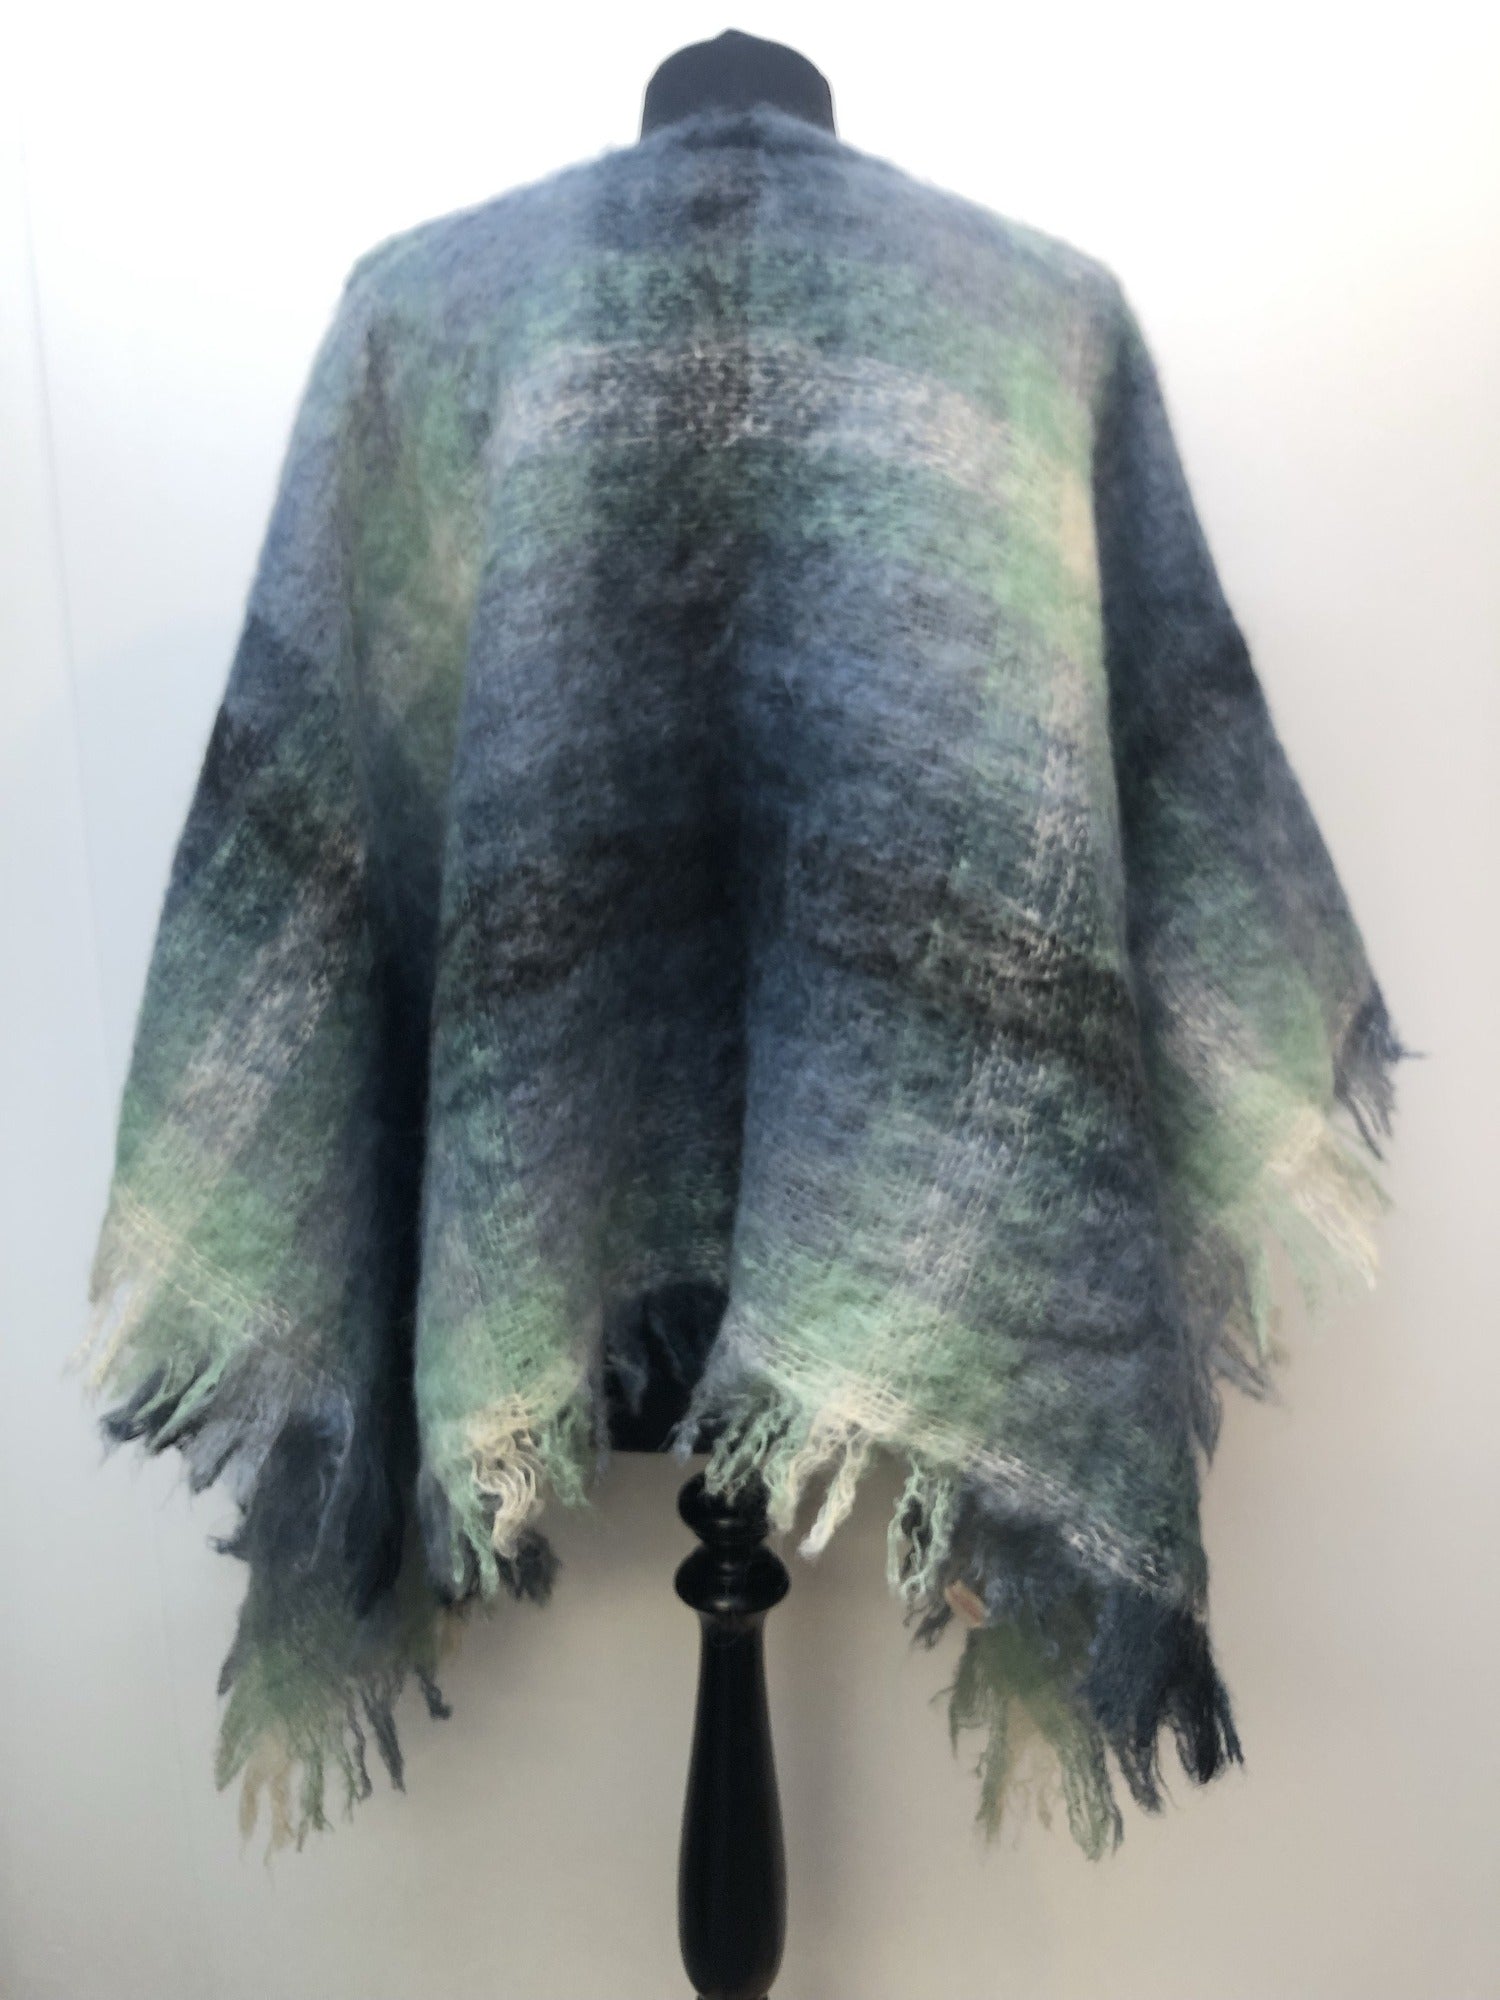 Wool  vintage  poncho  One Size  Mohair  Heather Glen  cape  blue  60s  1960s